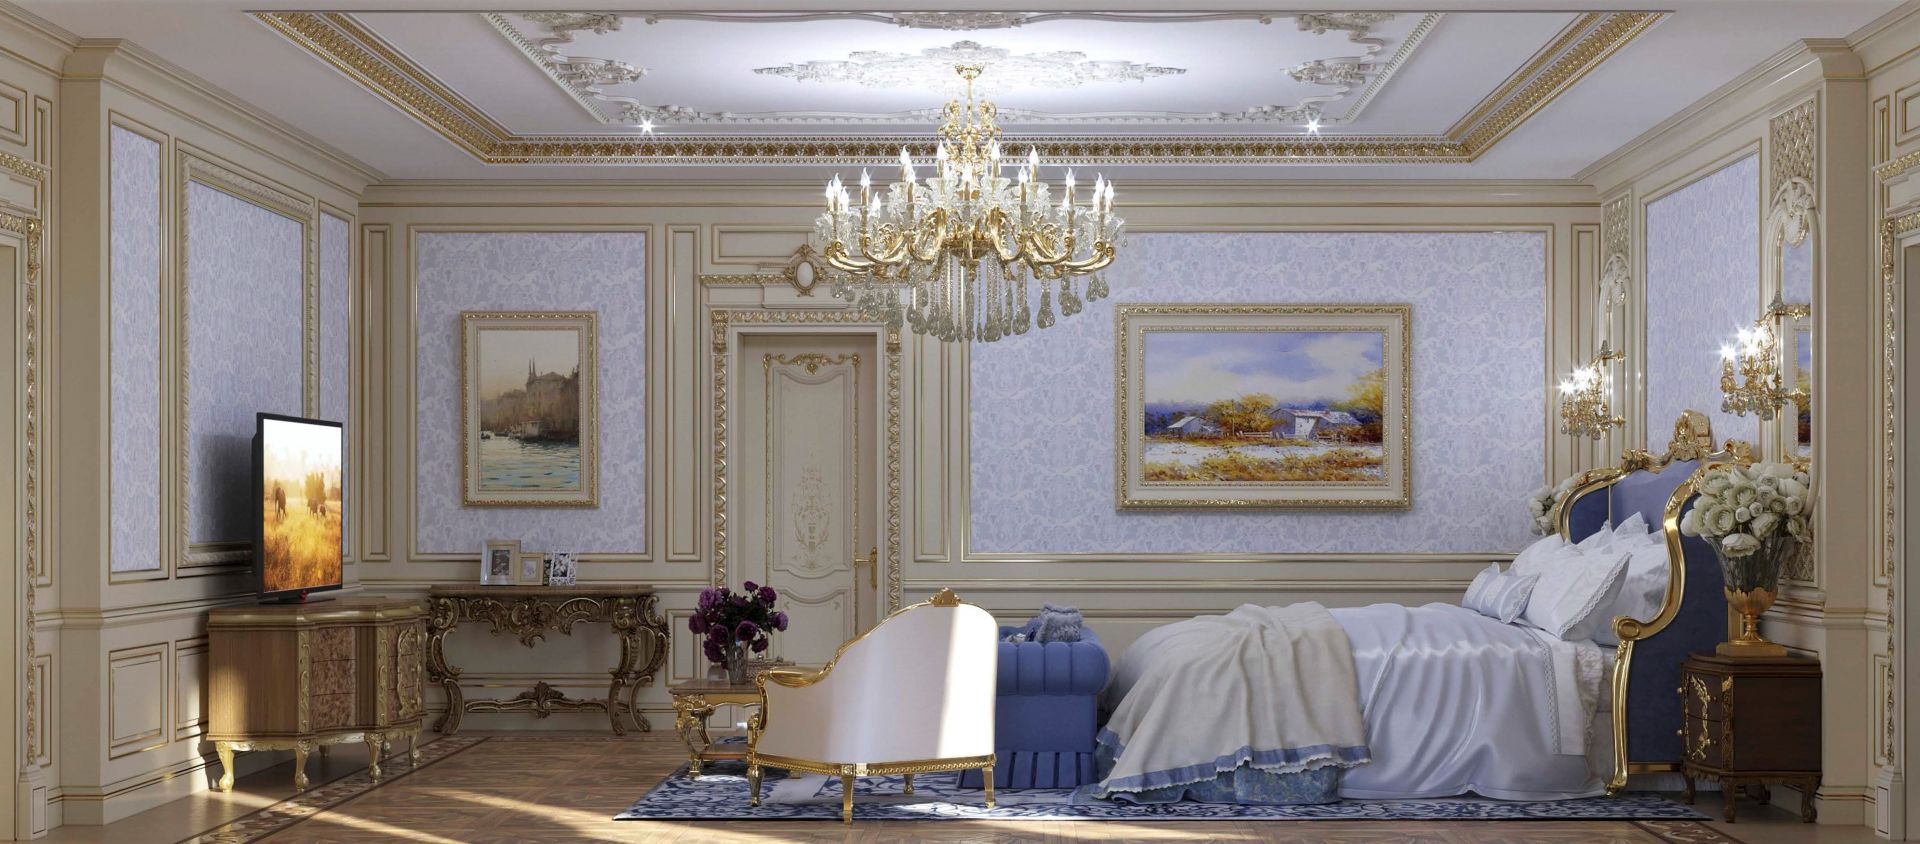 Palace-style bedroom interior